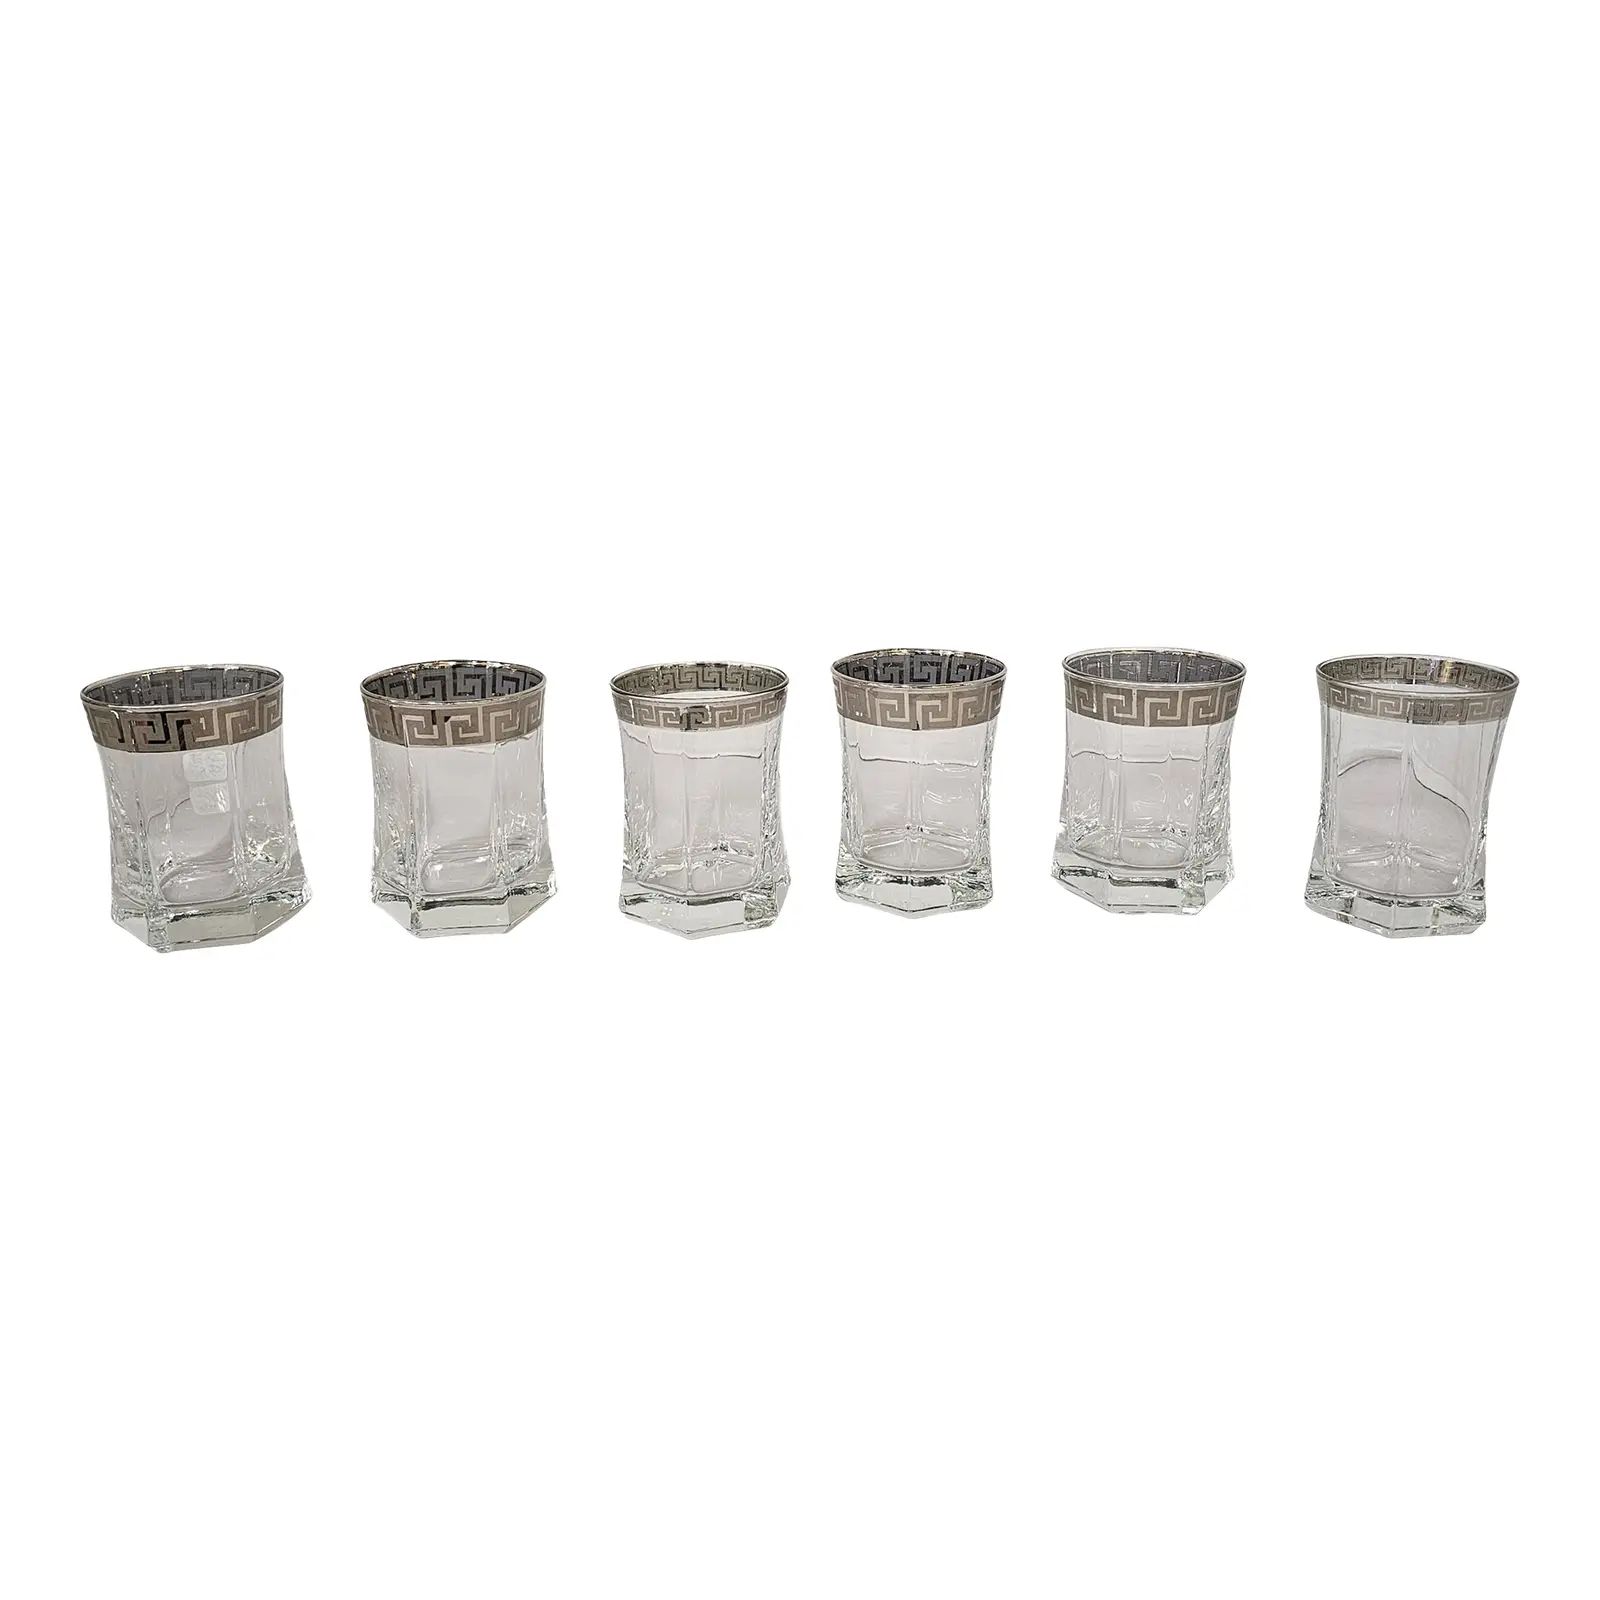 70’s Hexagonal Whiskey Glasses With Silver Greek Key Band - Set of 6 | Chairish